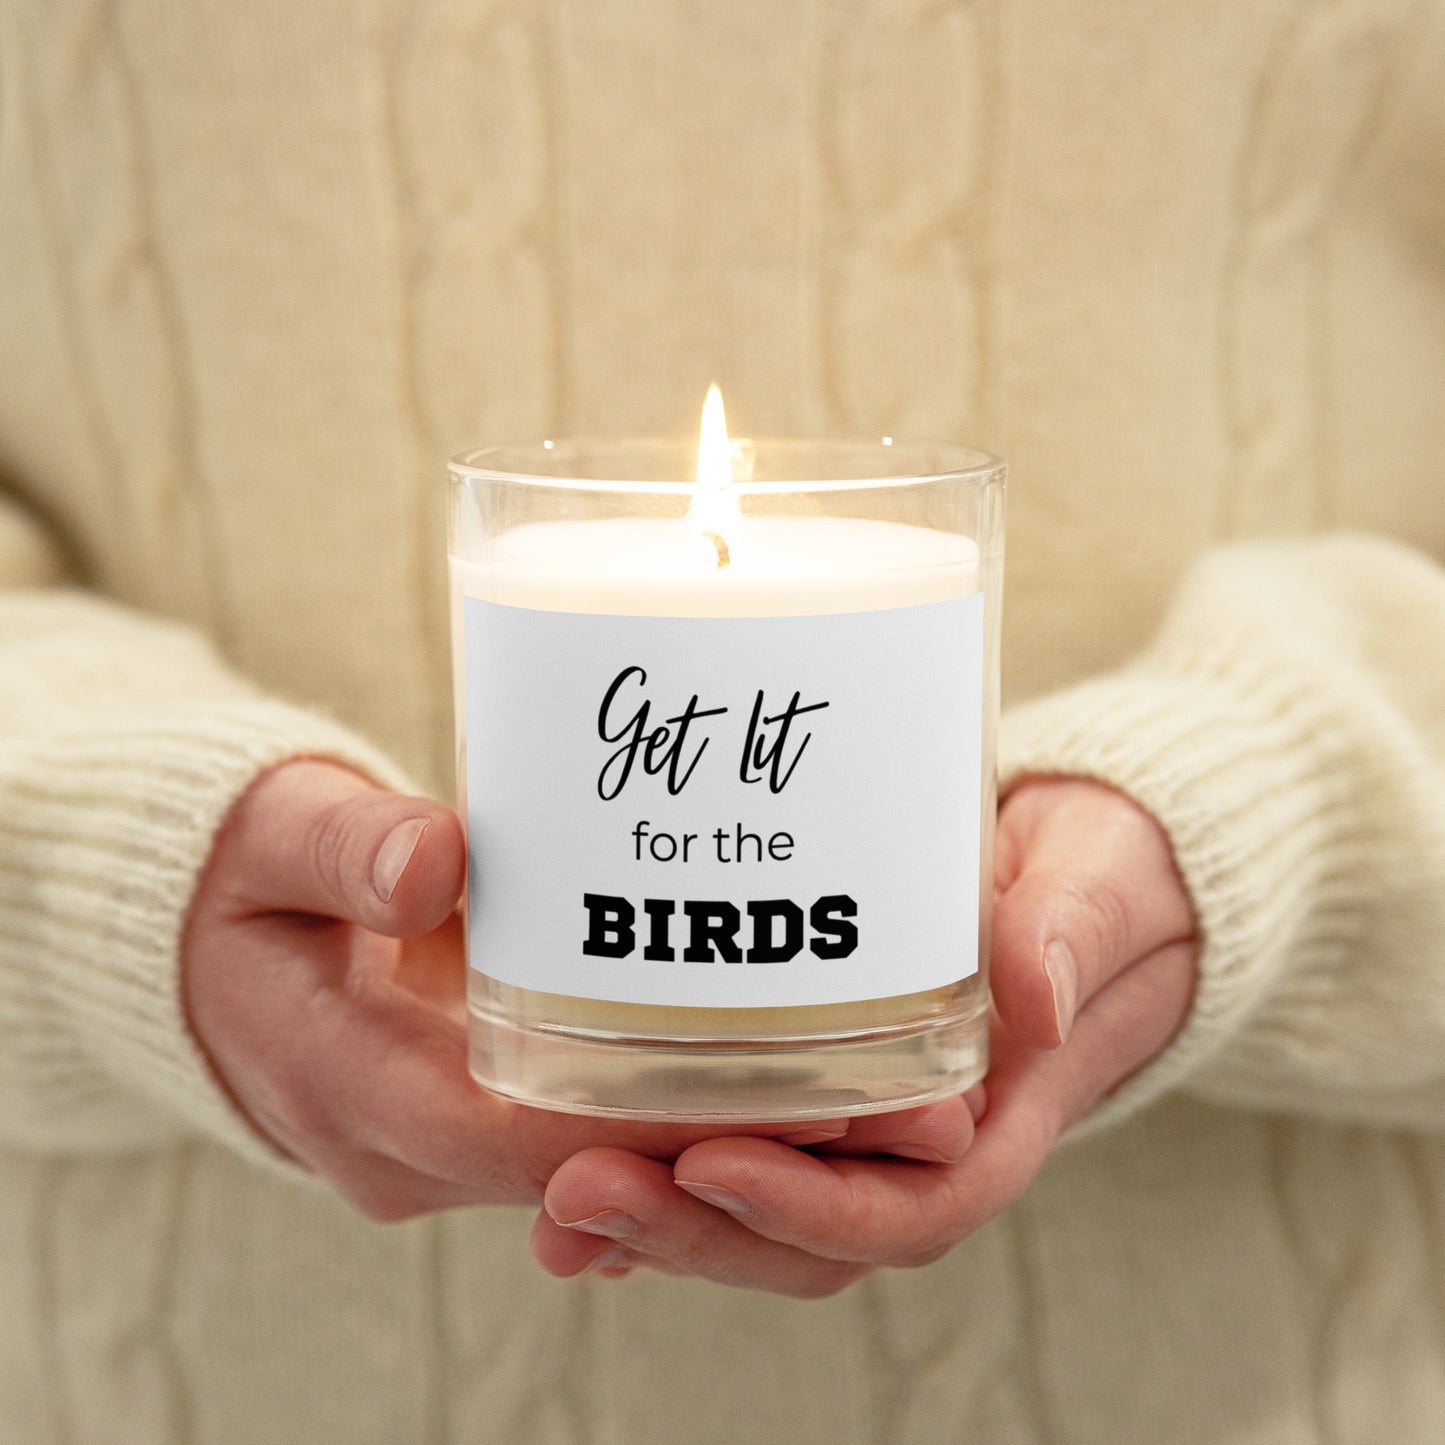 Get lit for the birds Glass jar soy wax candle